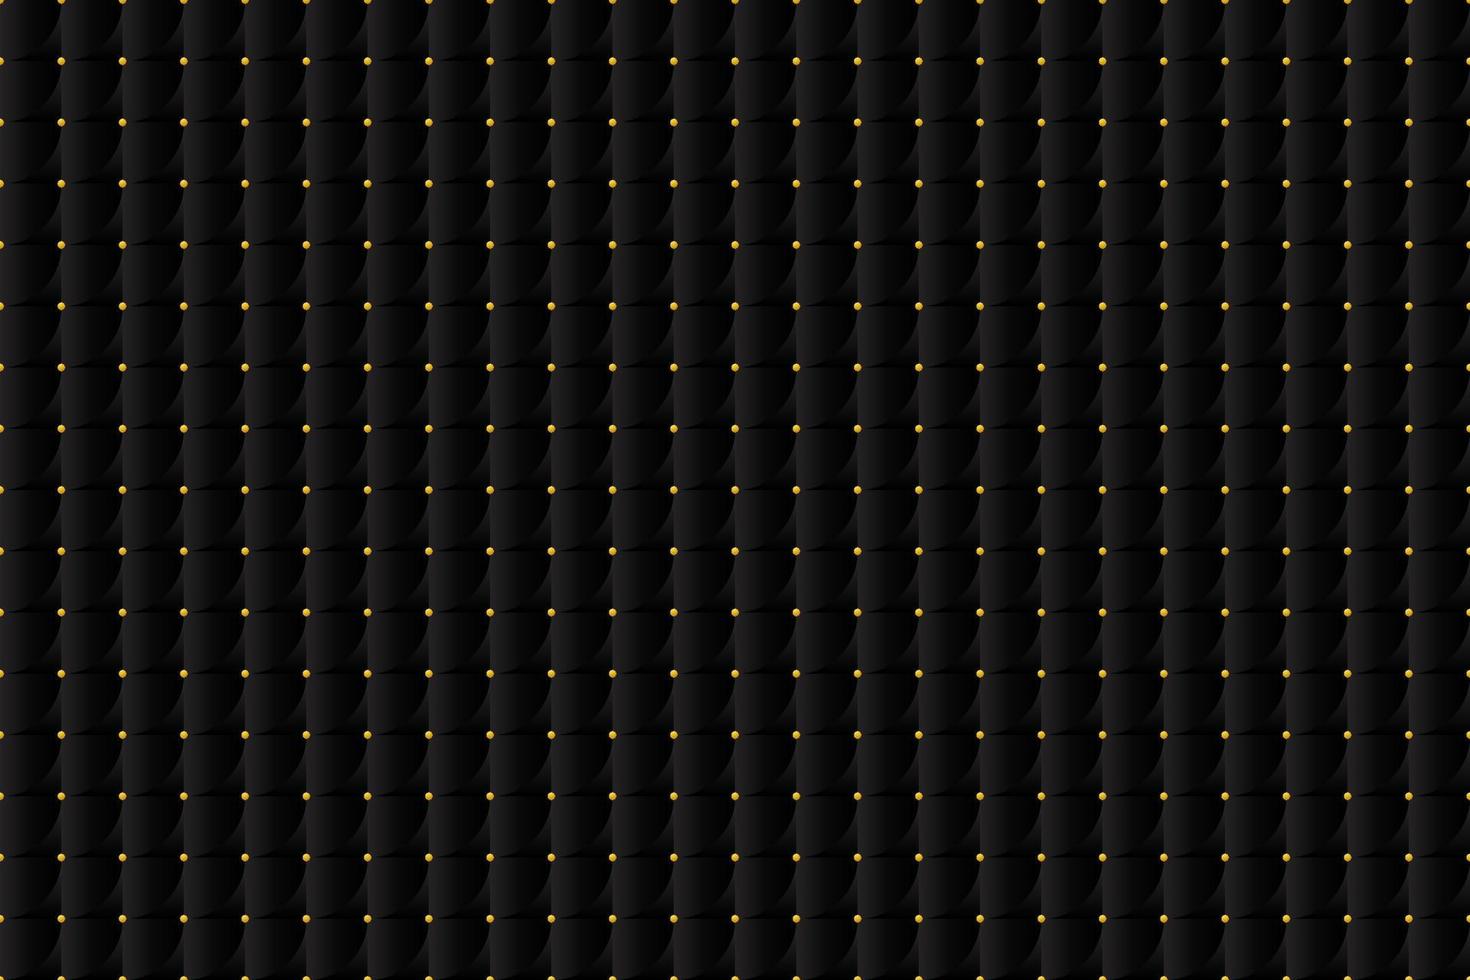 Dark squares and golden beads pattern luxury background vector